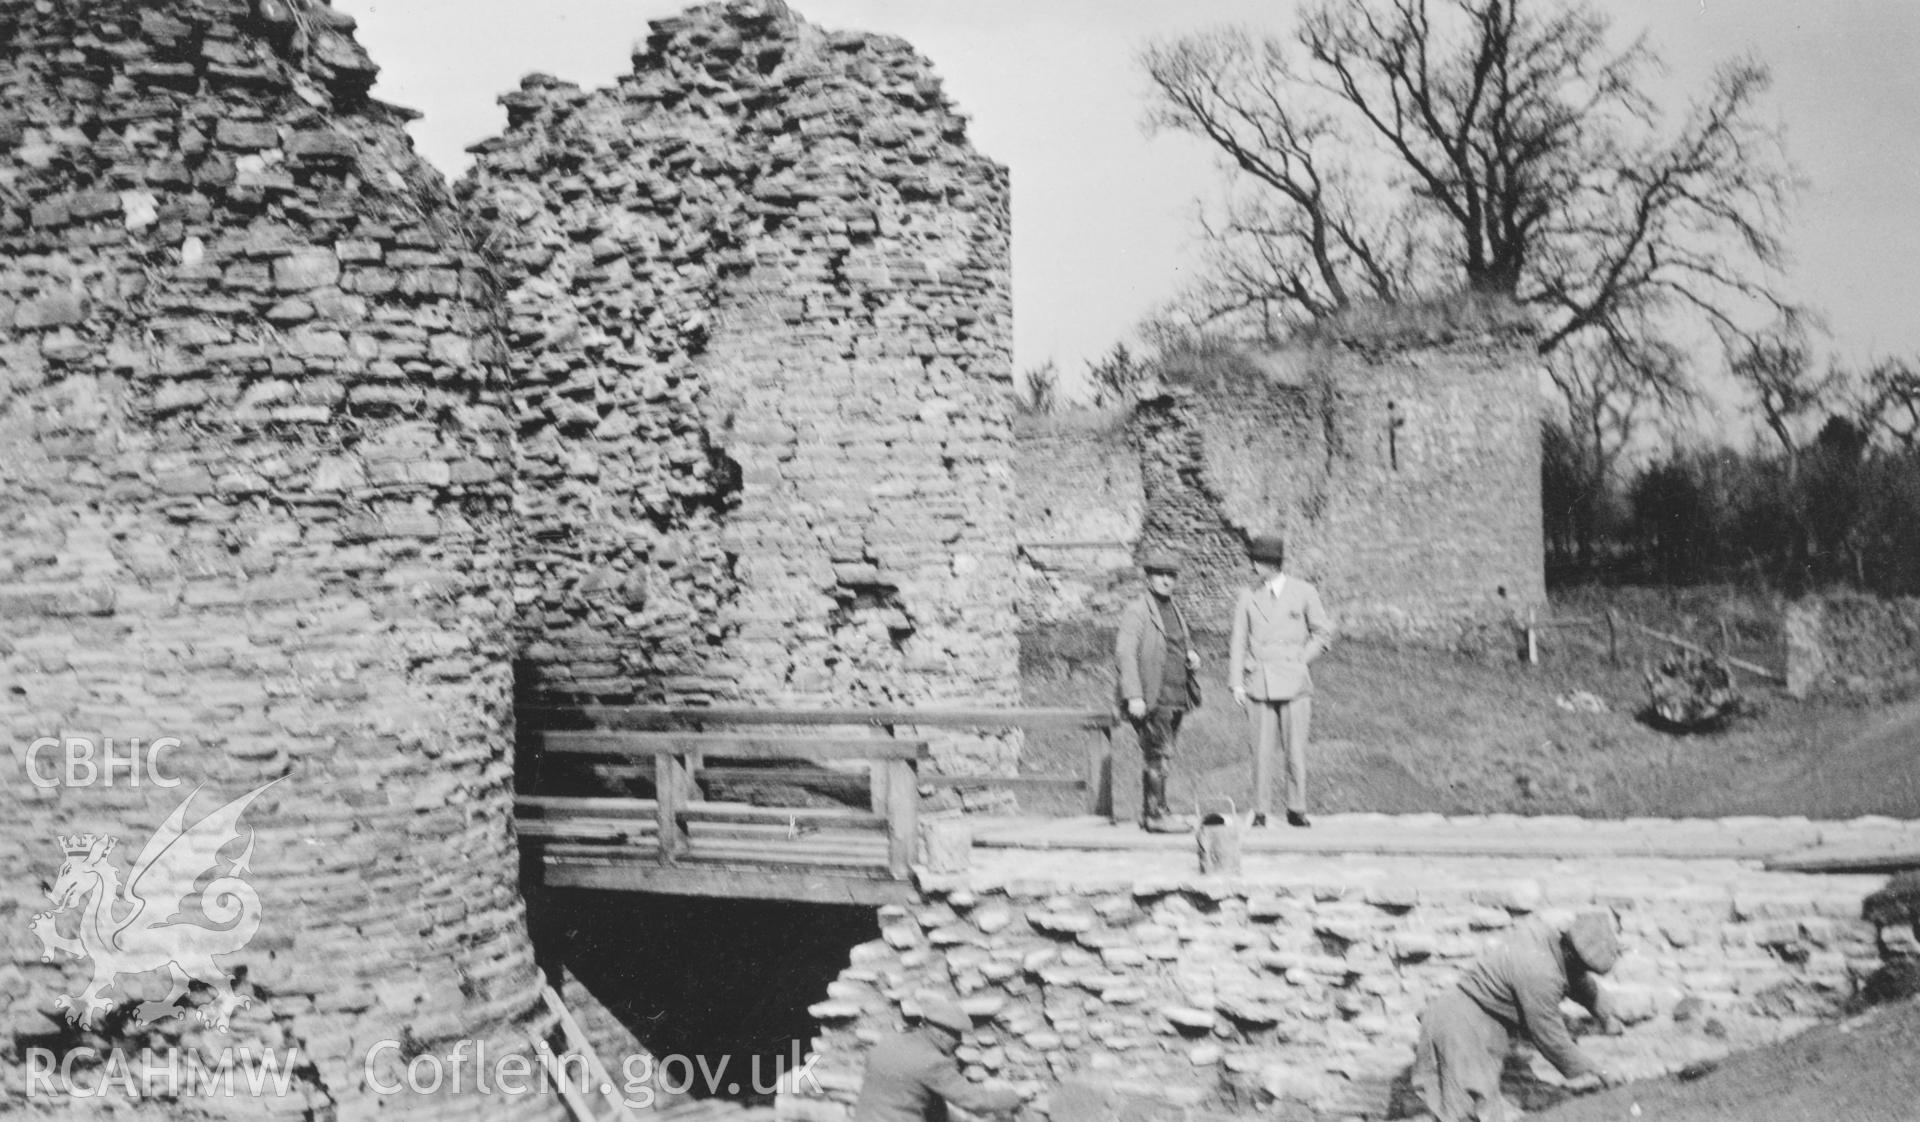 View of access bridge and towers during restoration, White Castle, Llantilio.  Three workmen and one other figure captured on the image.  Dated March 1934.